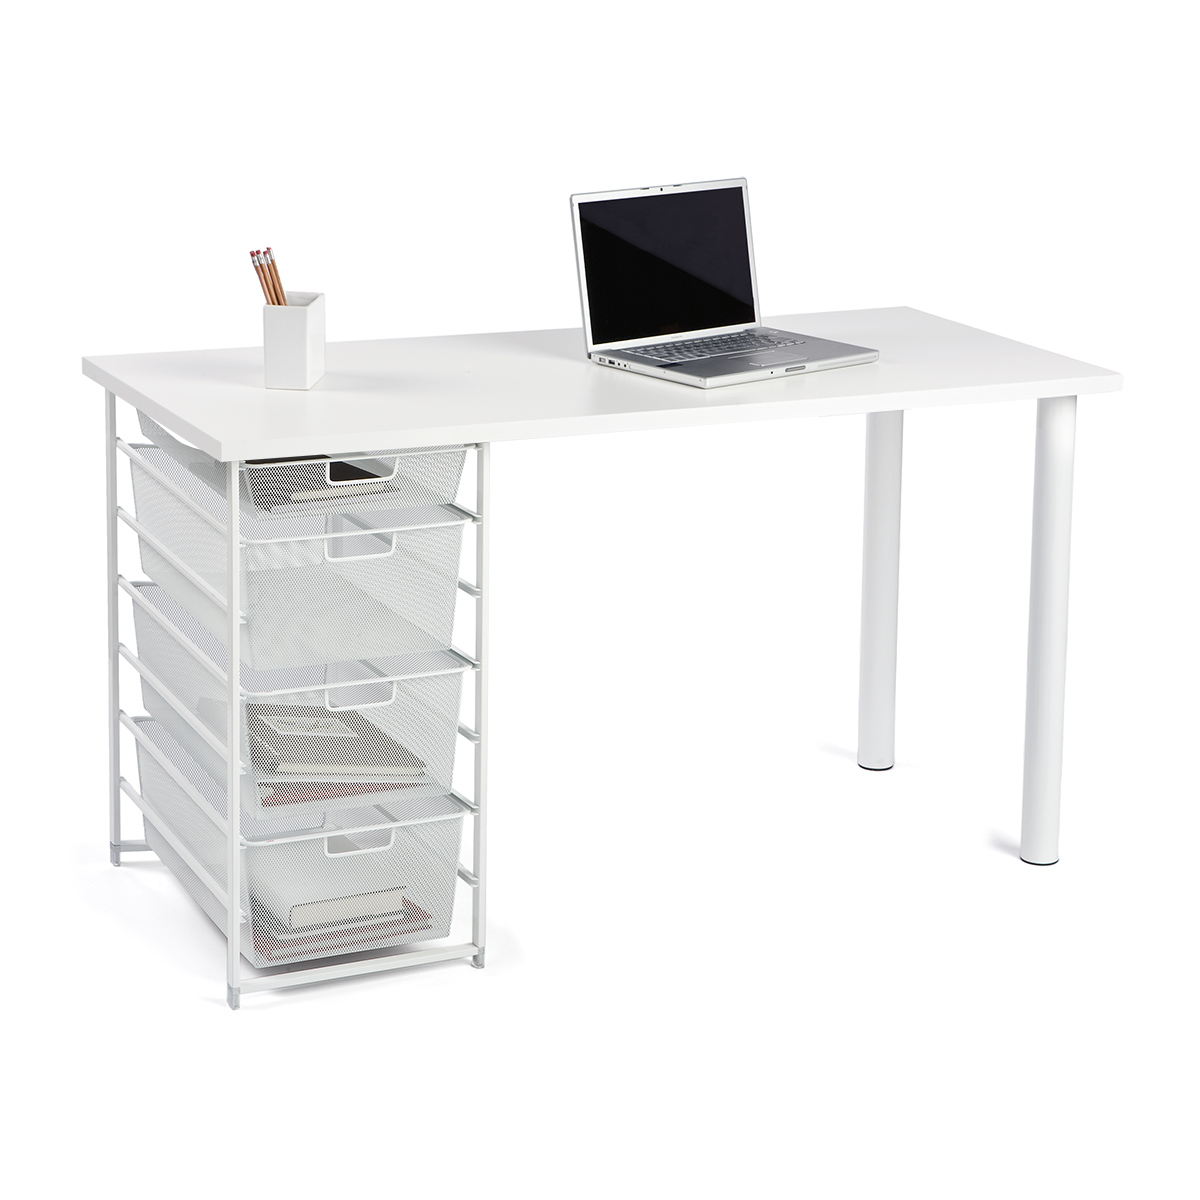 Custom Desks Design Your Own Customized Desk The Container Store